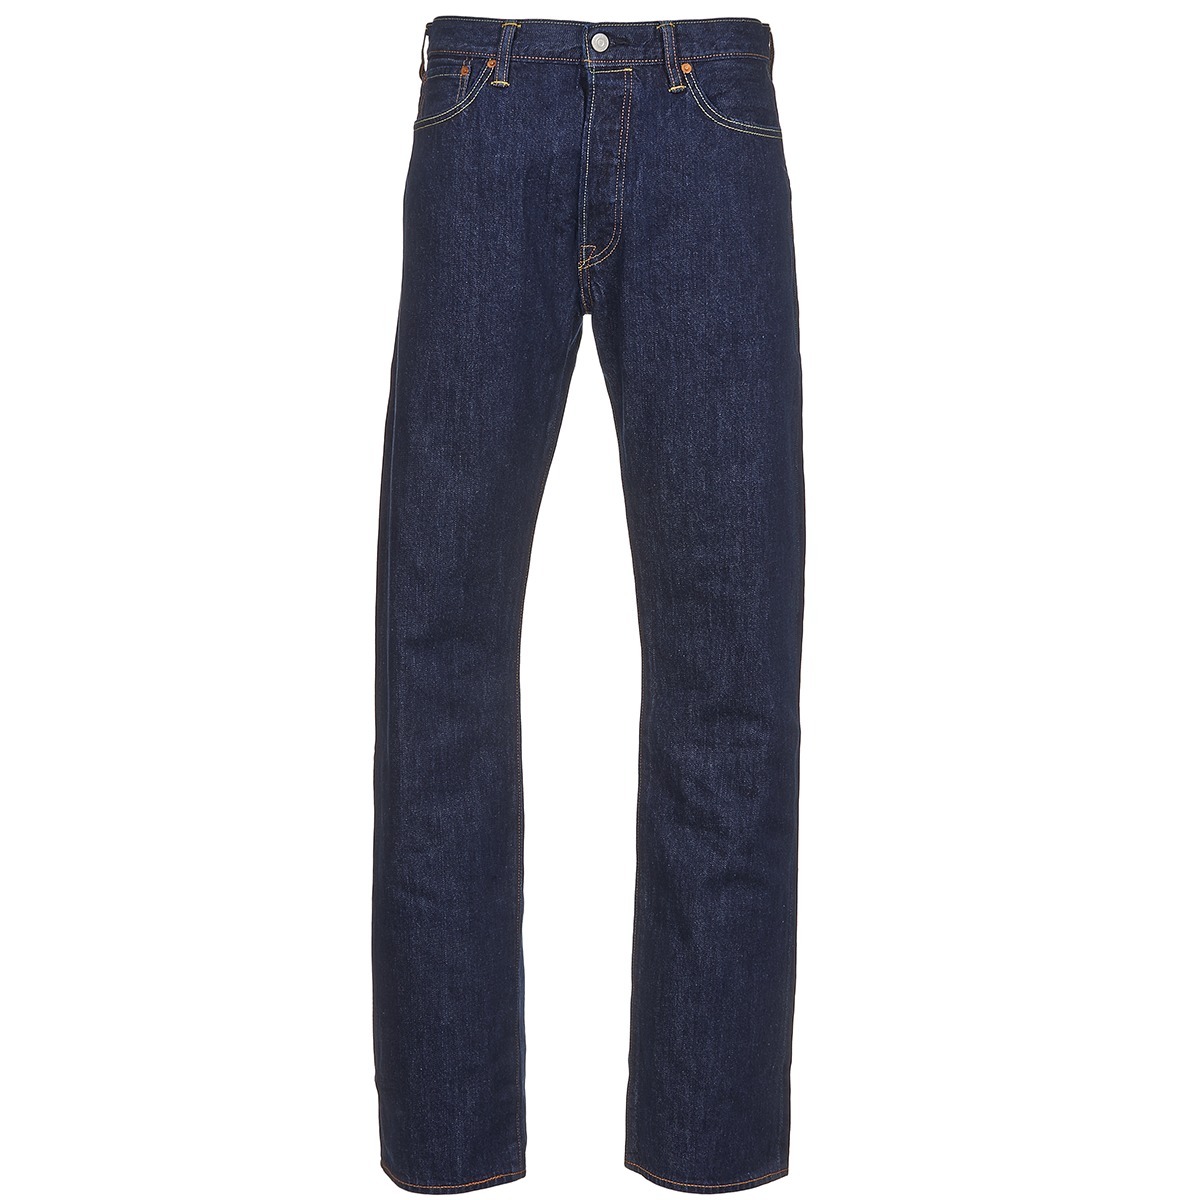 Man Jeans in Blue by Spartoo GOOFASH